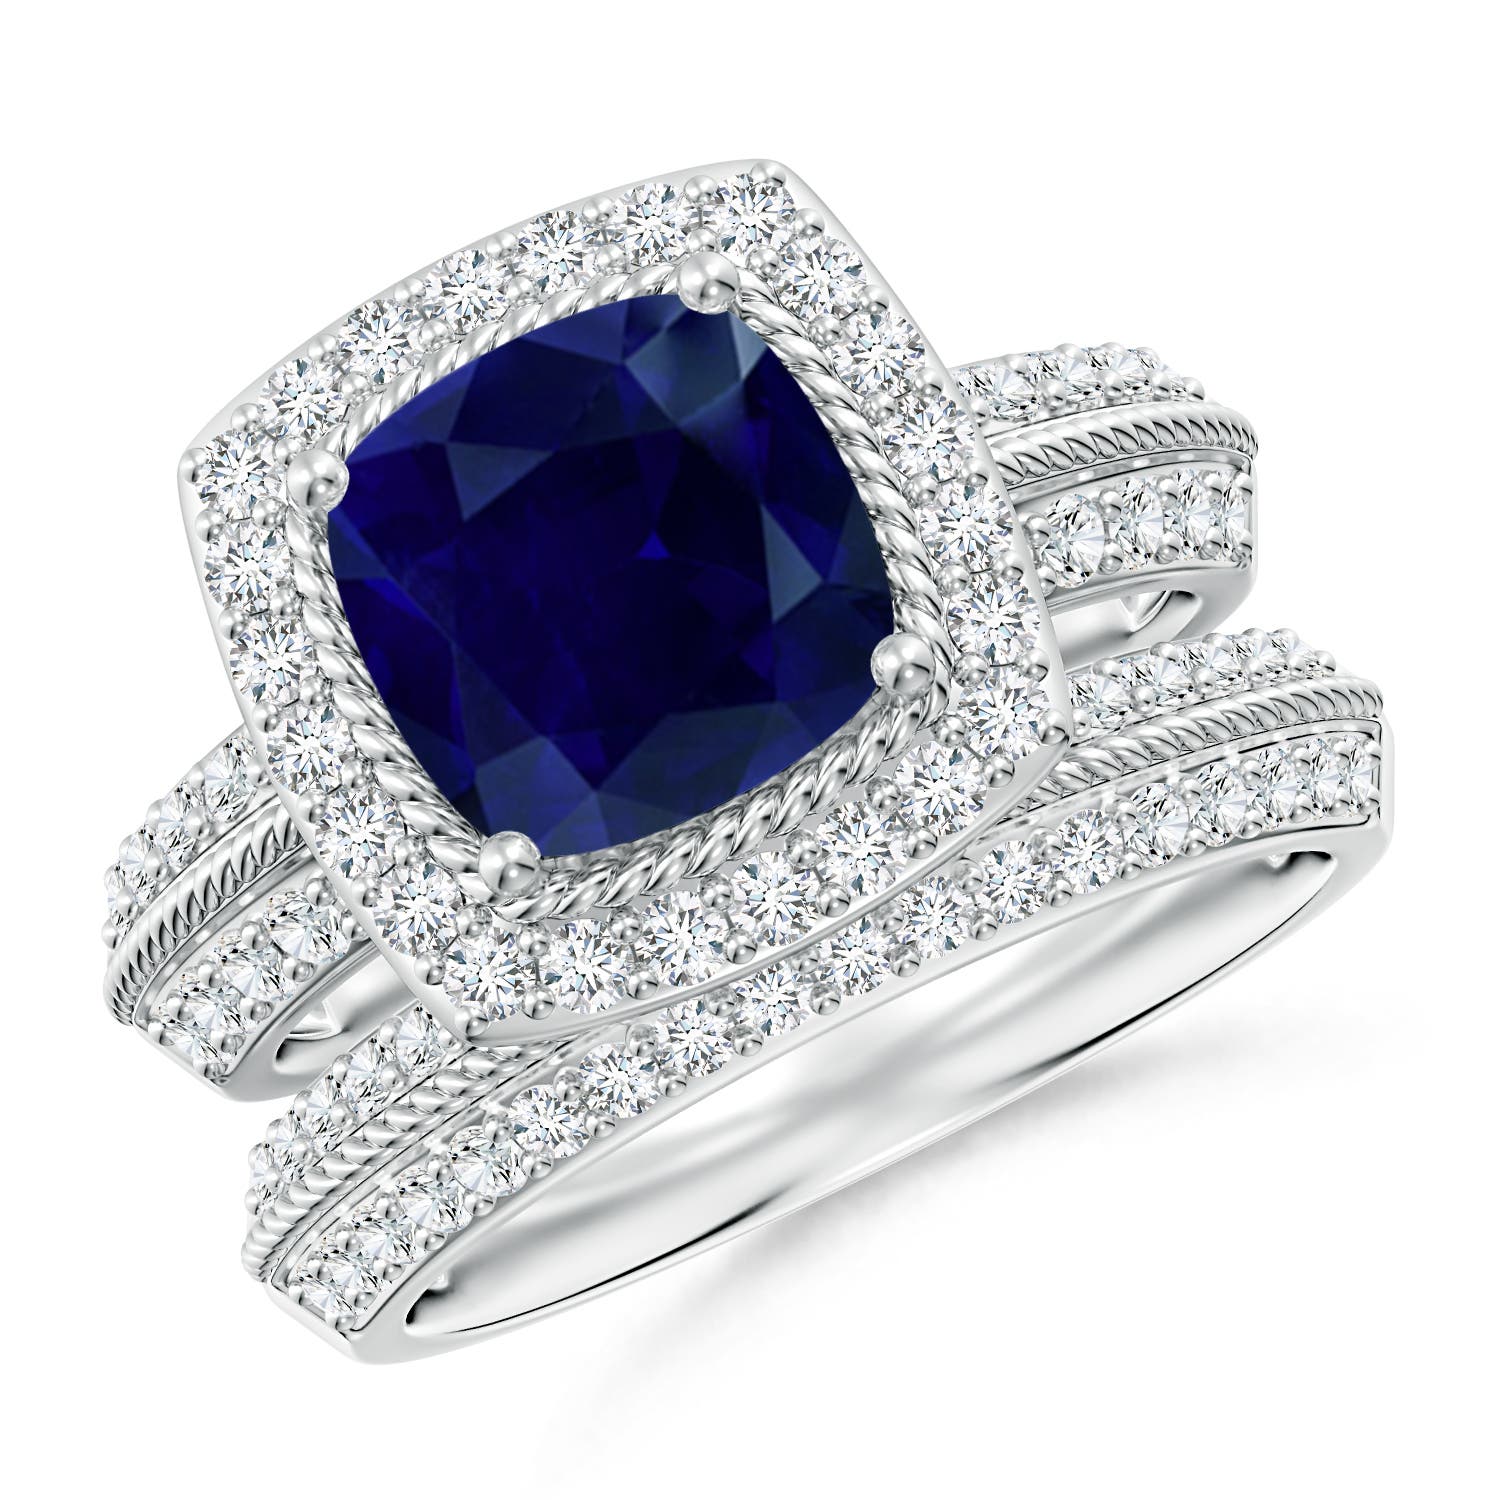 AA - Blue Sapphire / 3.38 CT / 14 KT White Gold